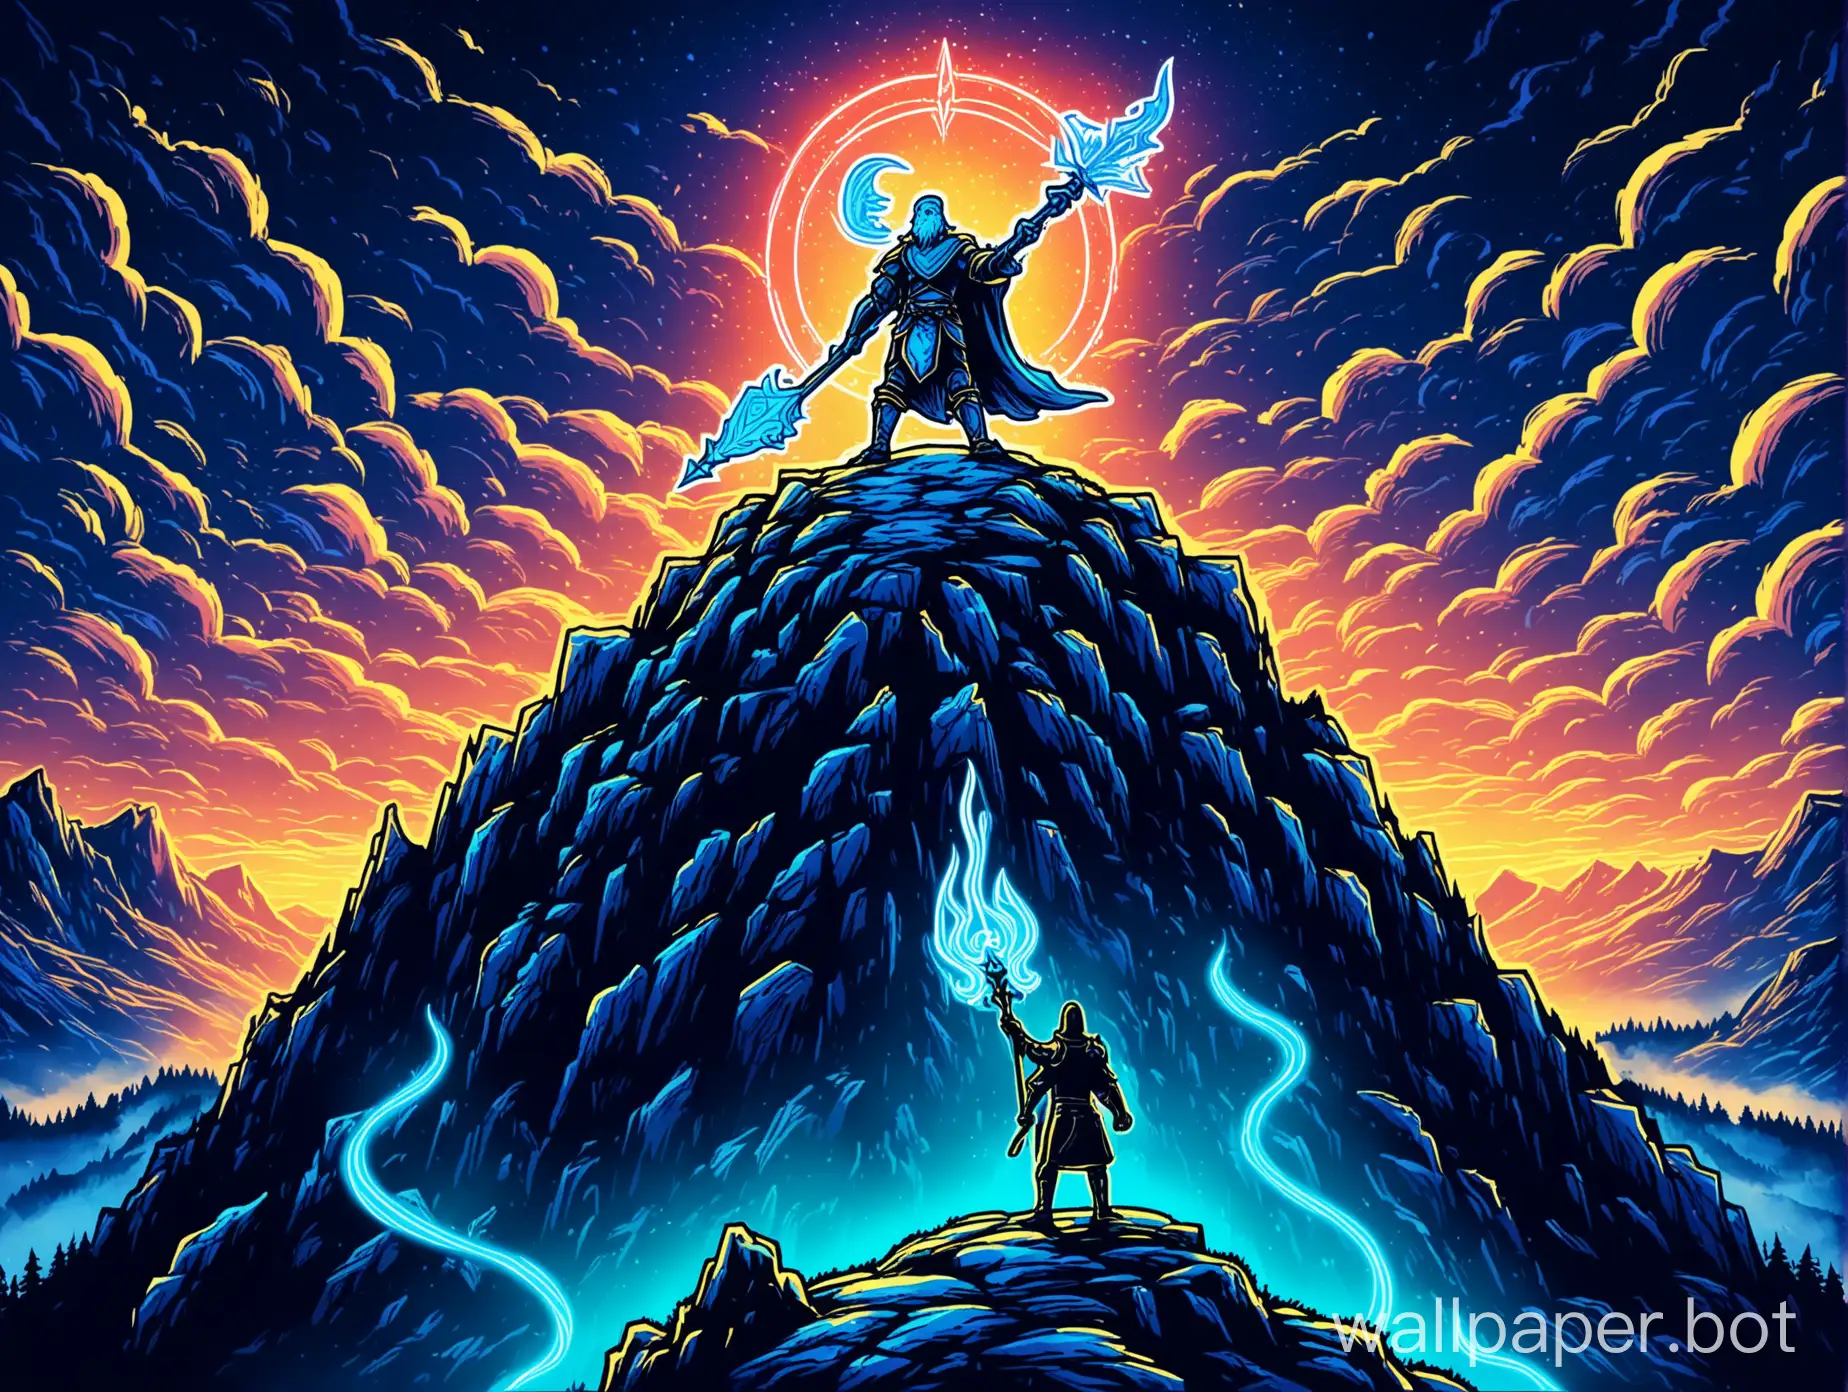 beautiful landscape, Scandinavia, neon outline, hero standing on top of a mountain, fantasy art. dungeons and dragons art style. the hero is holding holding a staff to the sky,casting blue spell